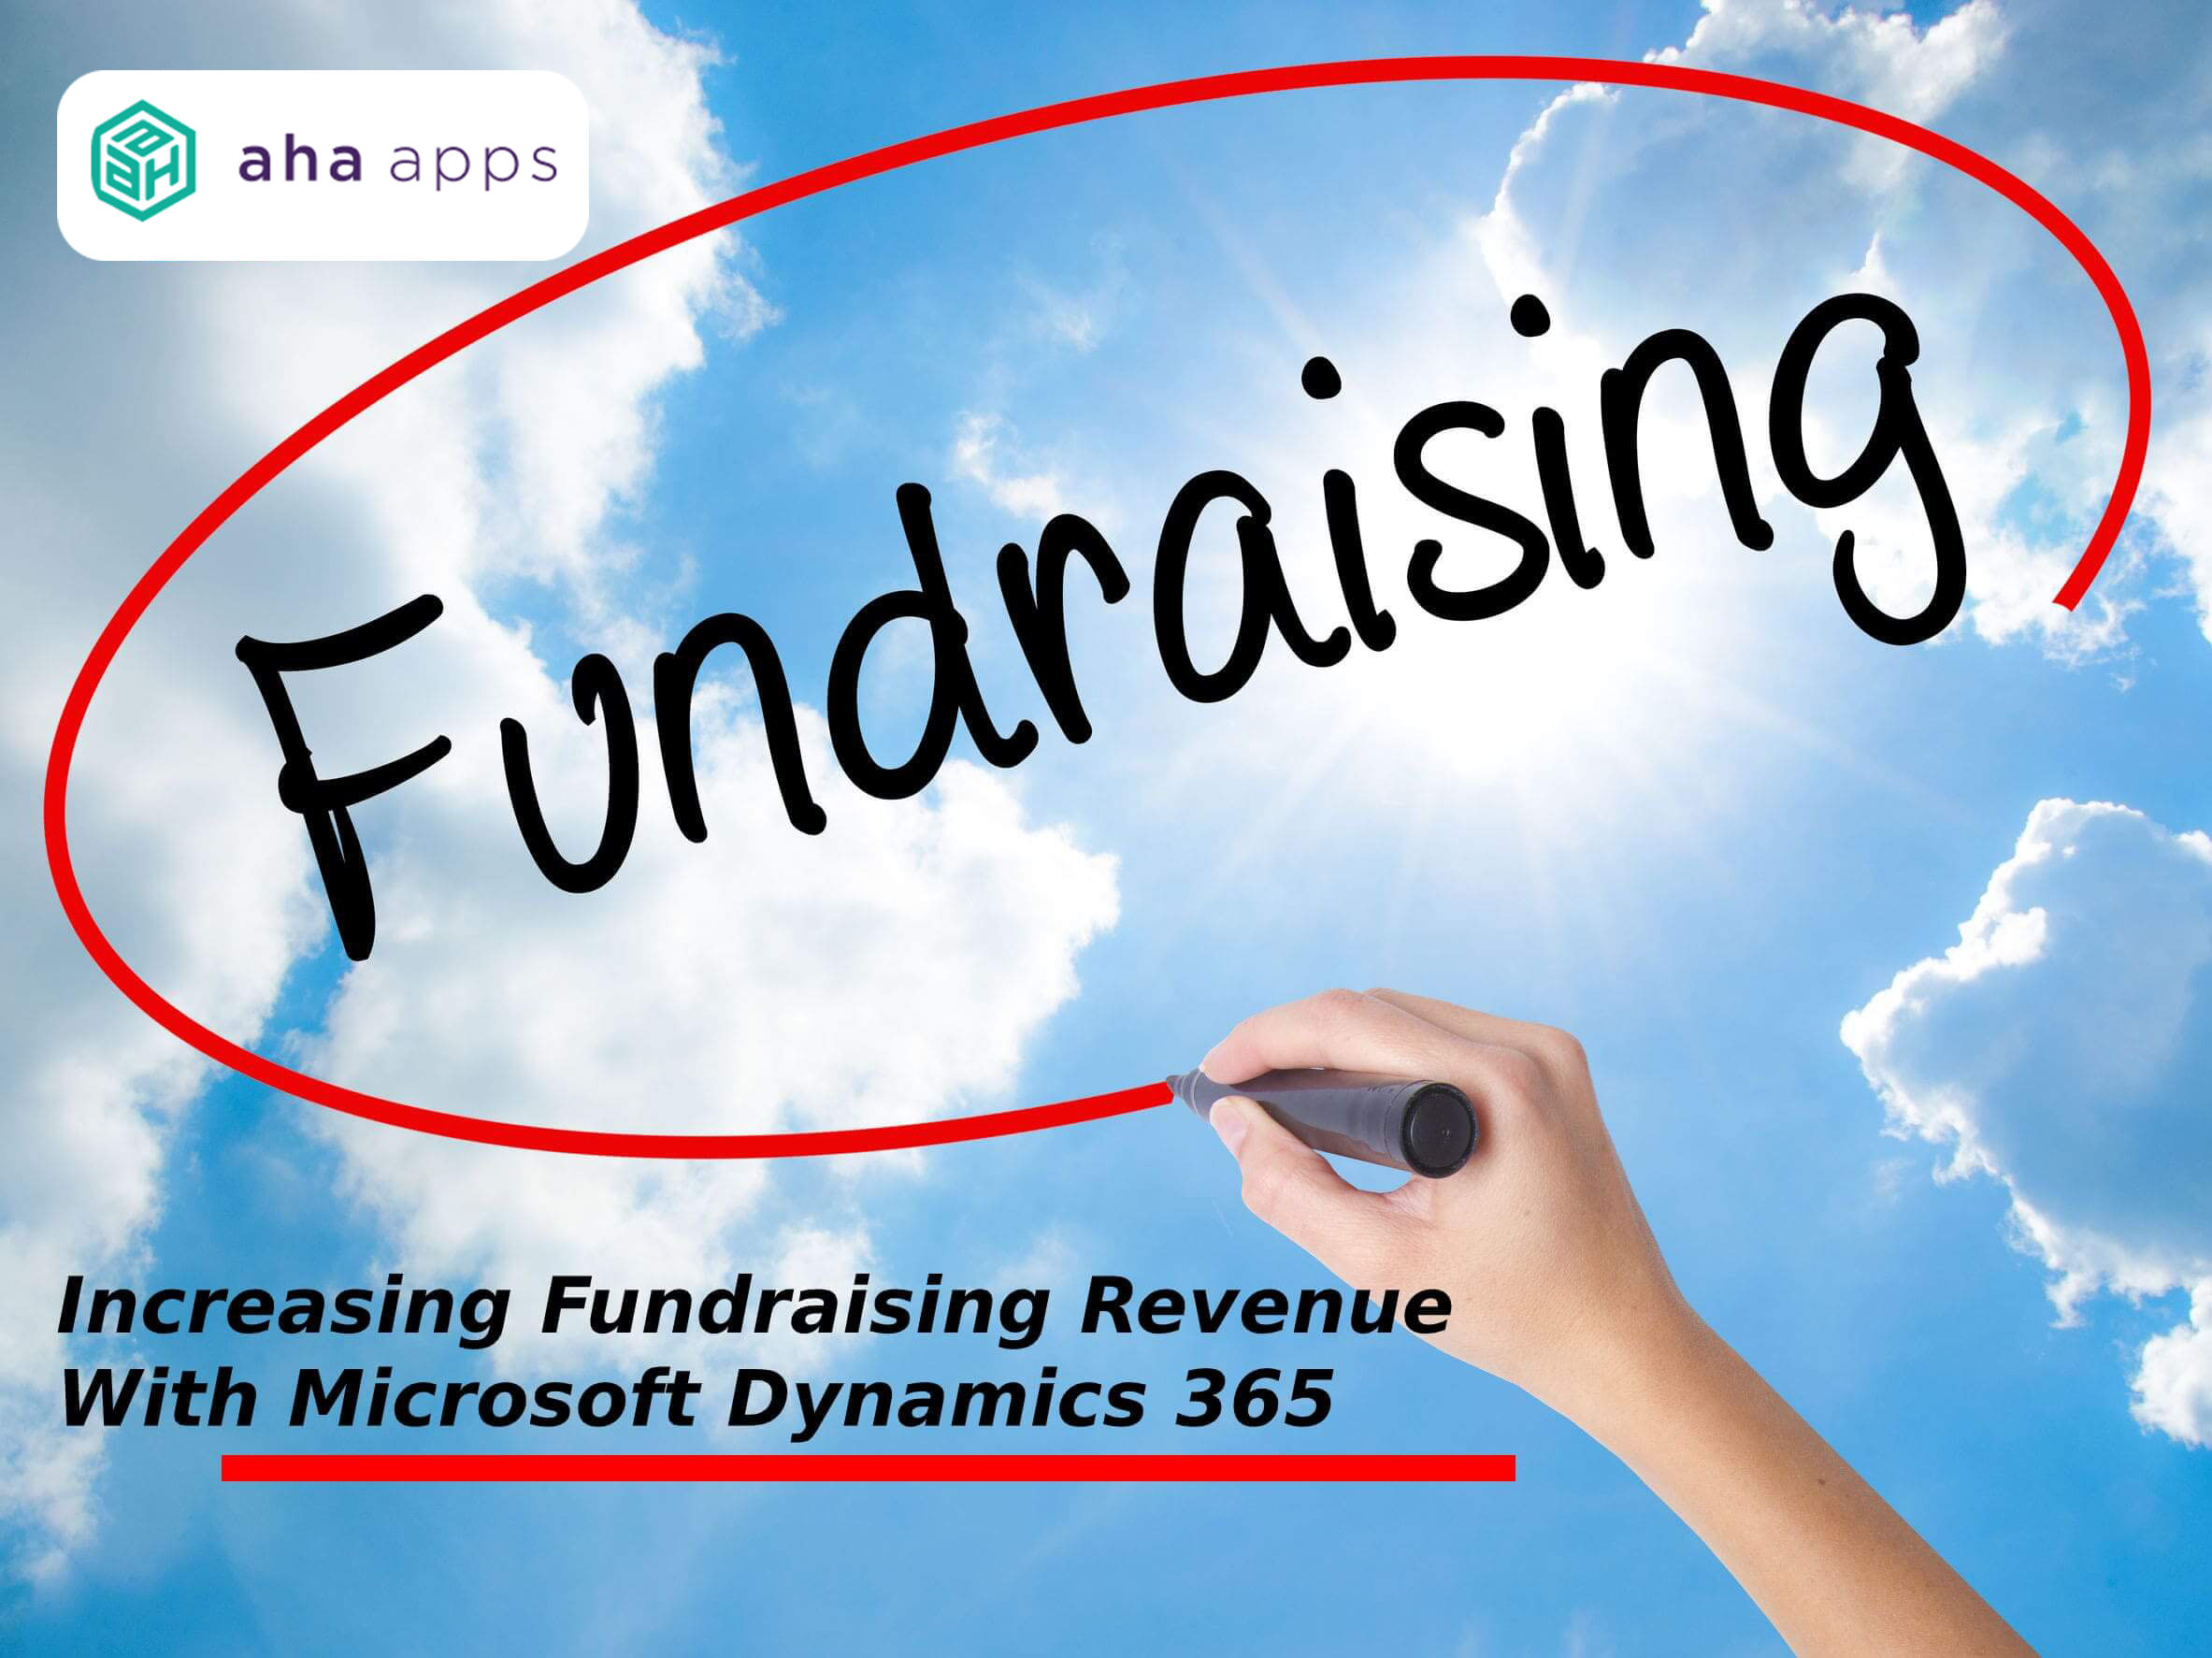 Increasing Fundraising Revenue with Microsoft Dynamics 365 - AhaApps